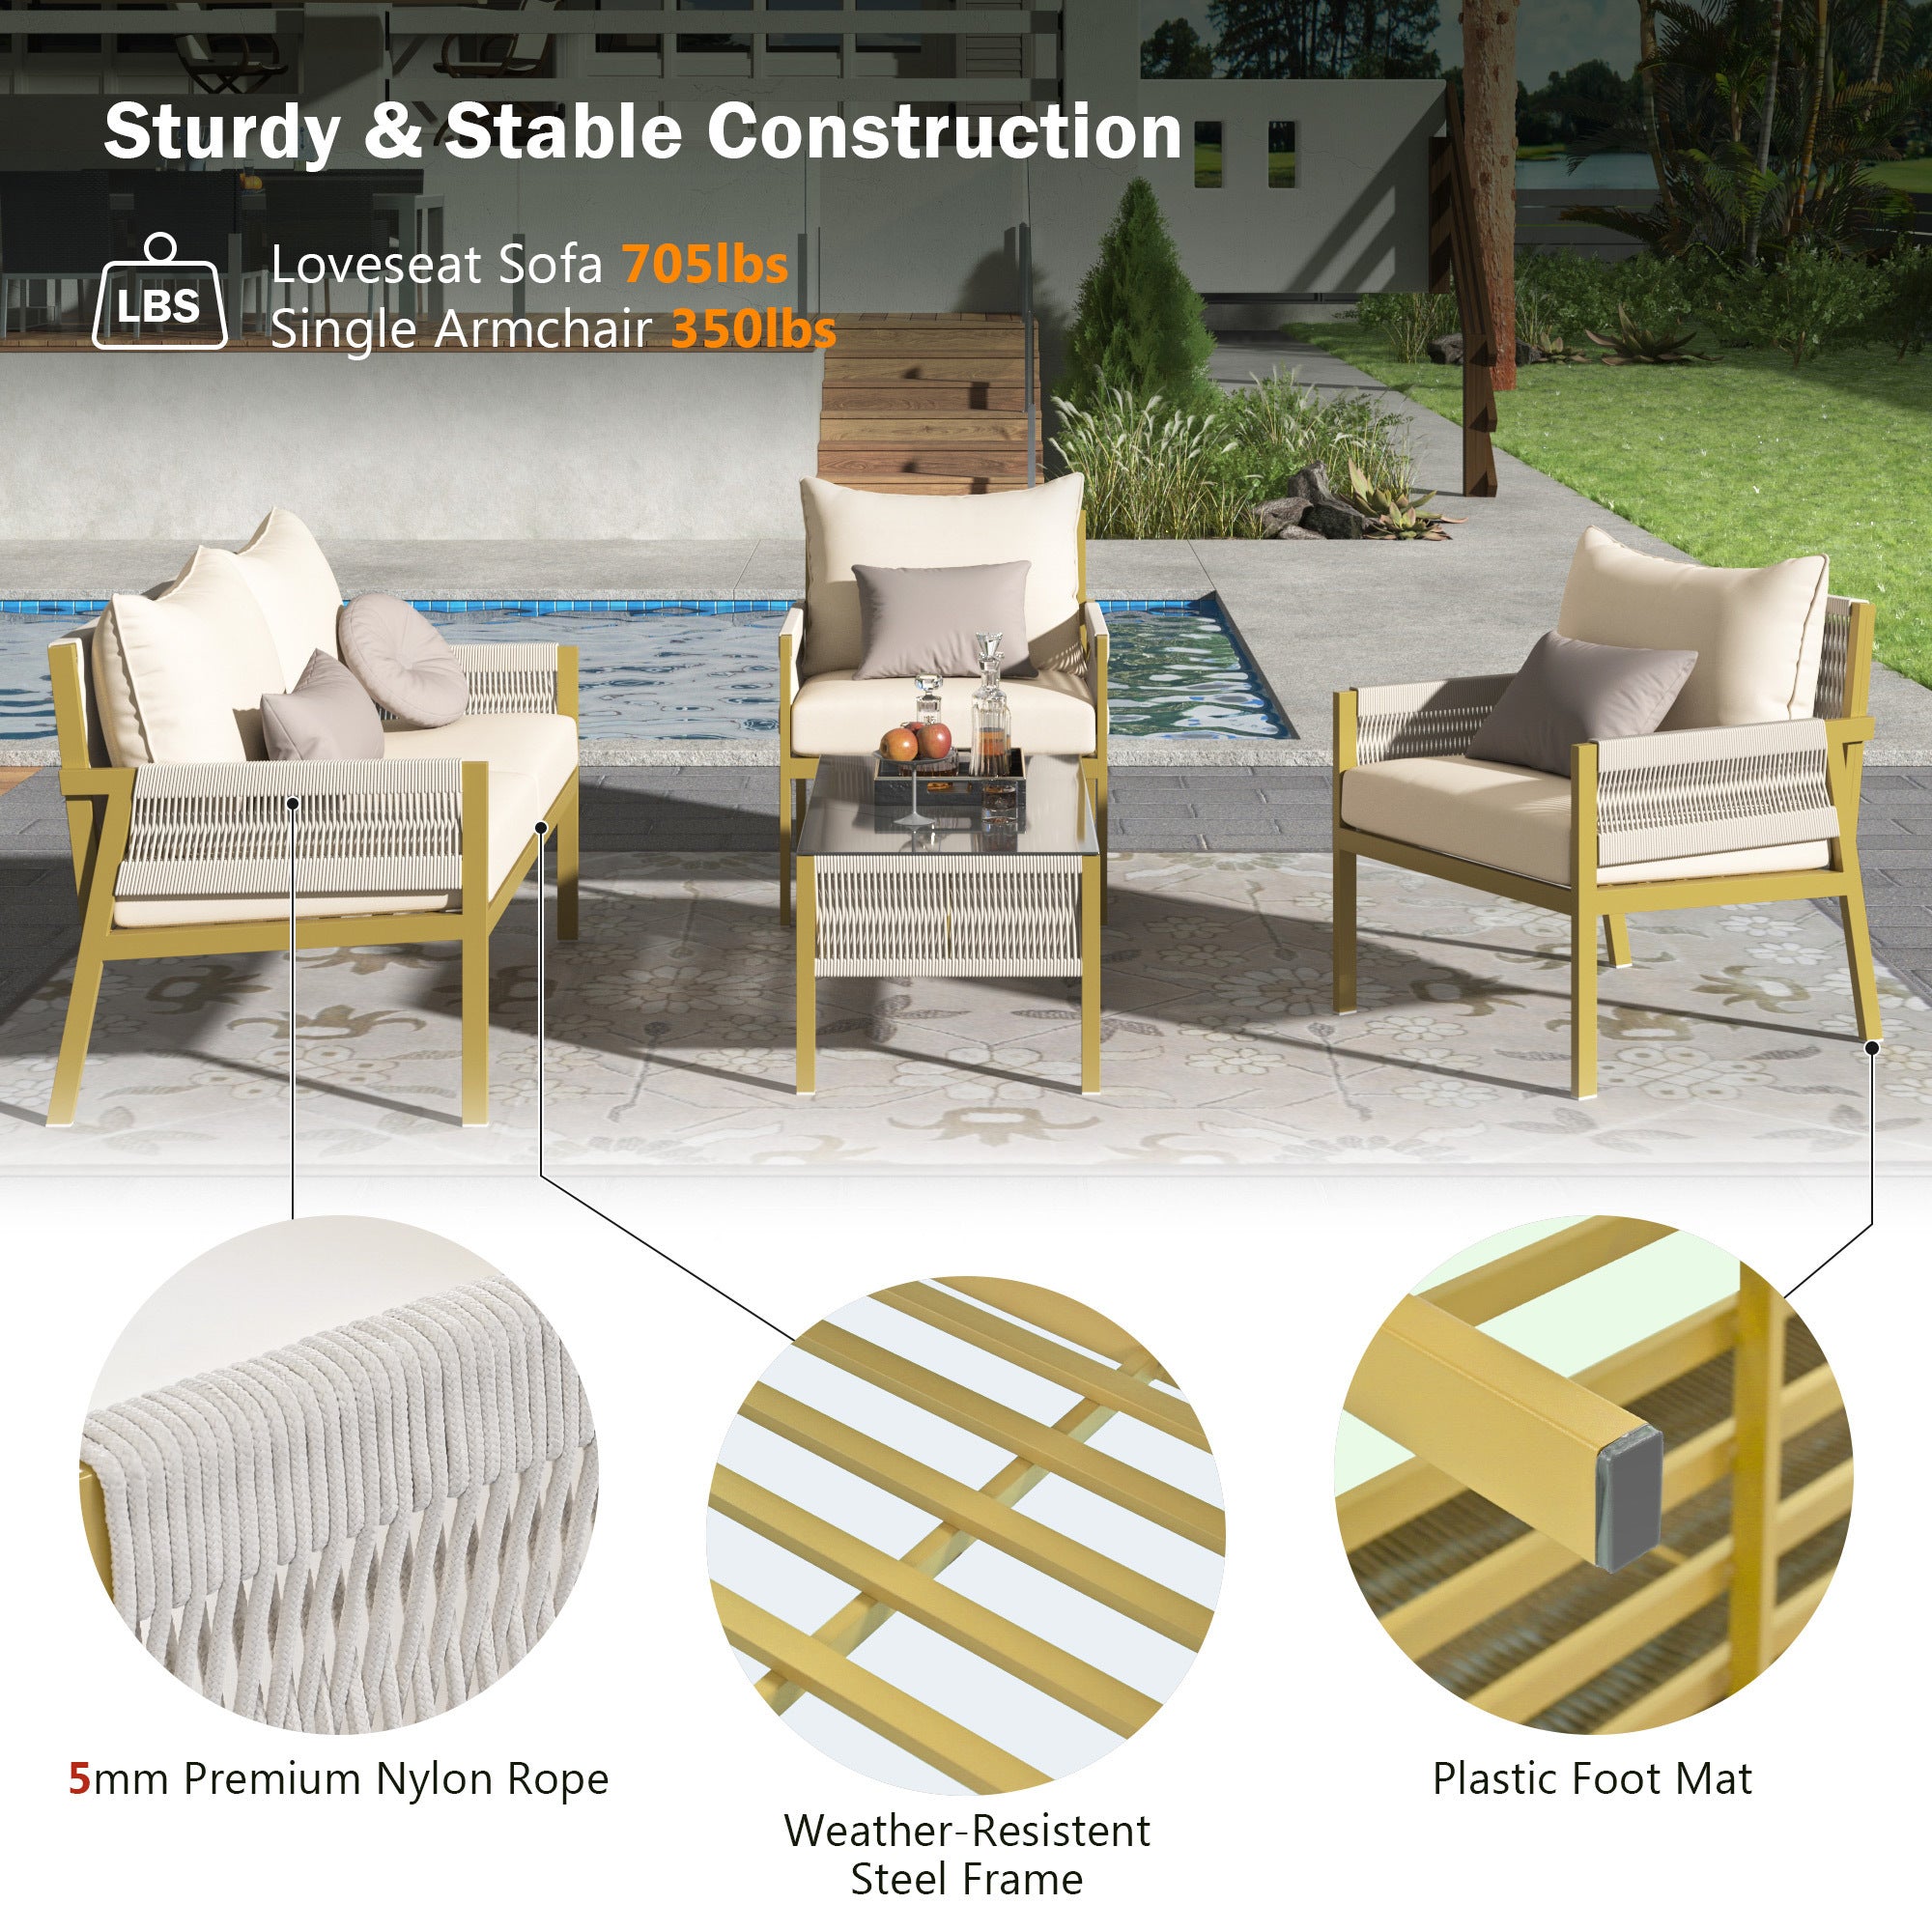 K&K 4-Piece Rope Patio Furniture Set, Outdoor Furniture with Tempered Glass Table, Patio Conversation Set Deep Seating with Thick Cushion for Backyard Porch Balcony (Beige&Mustard Yellow)